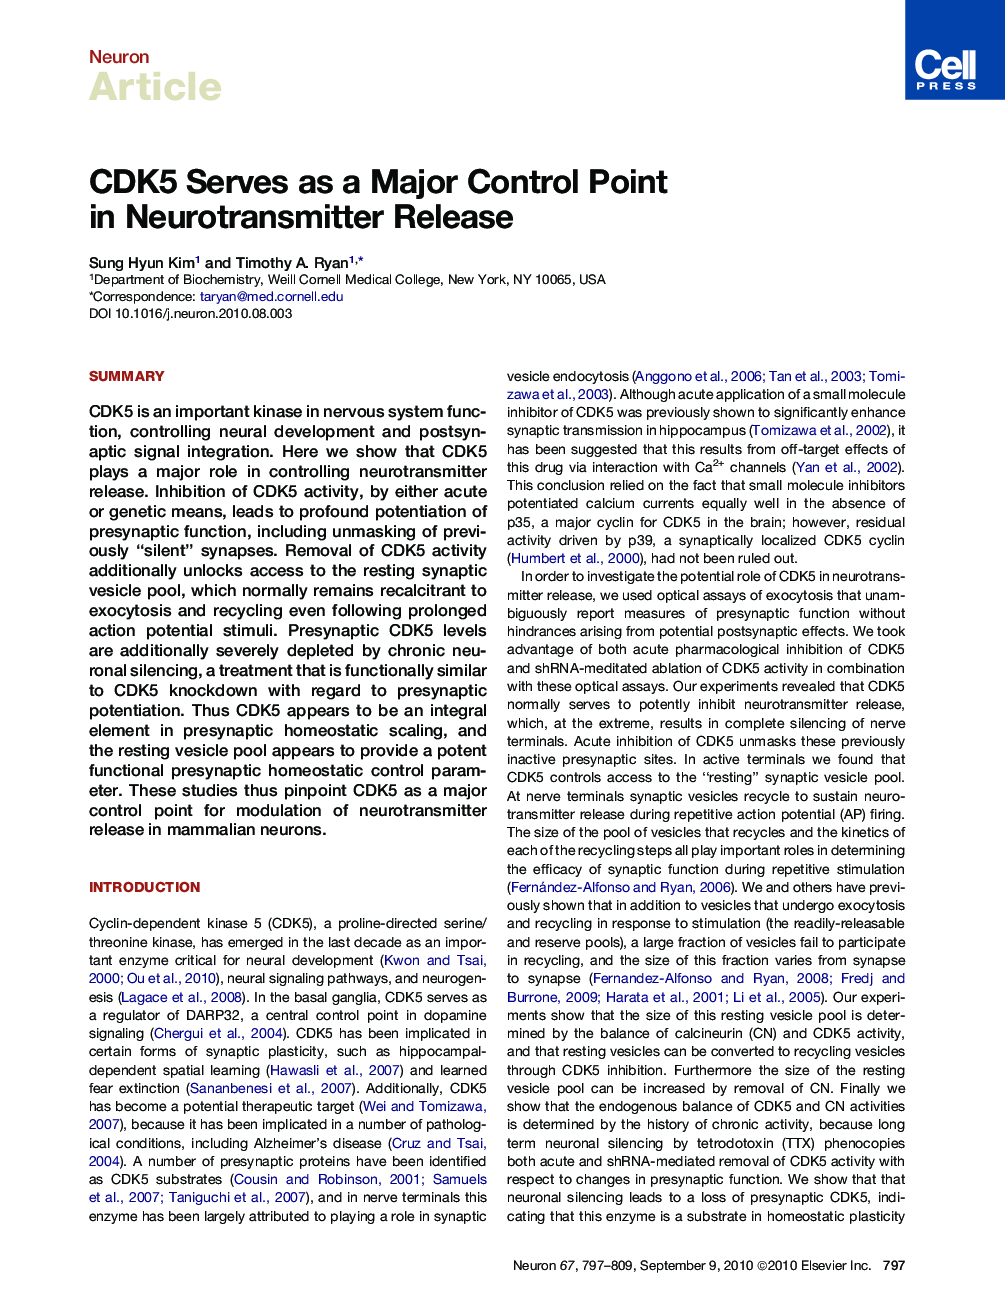 CDK5 Serves as a Major Control Point in Neurotransmitter Release